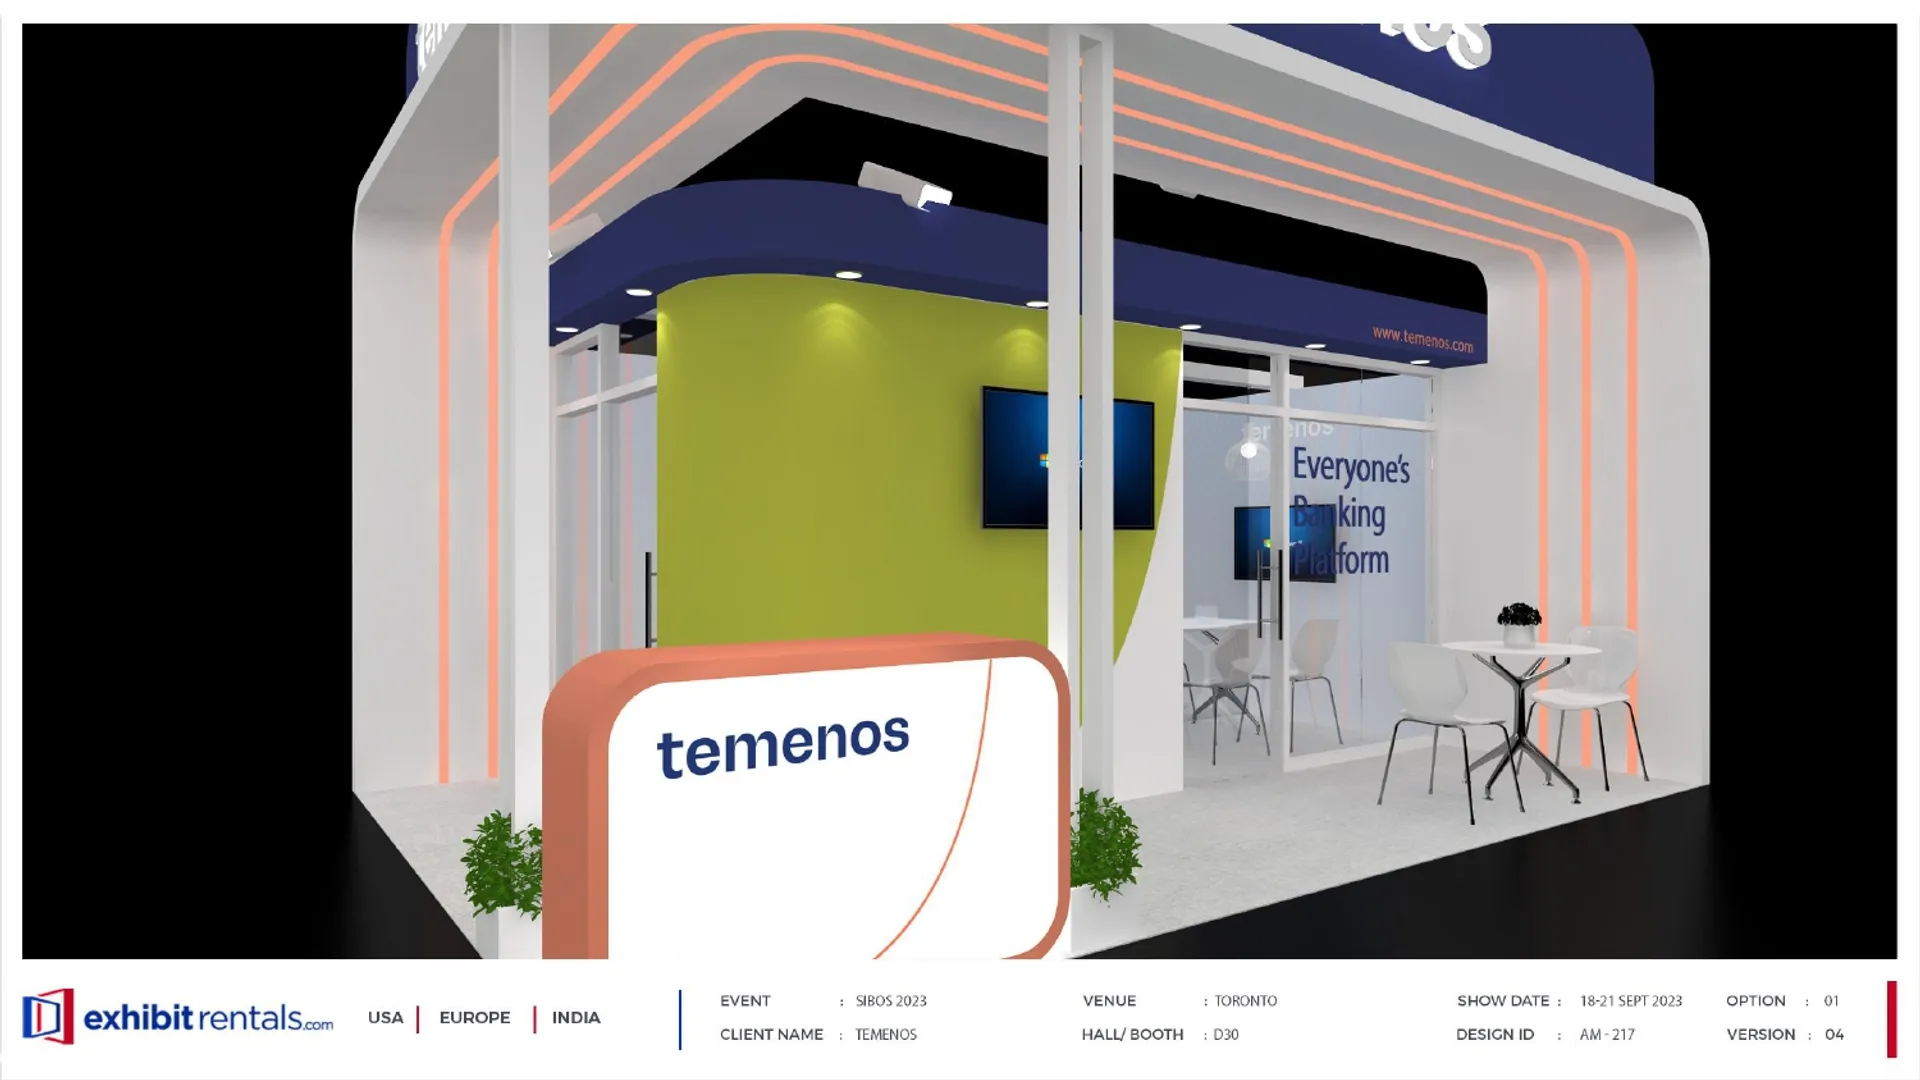 booth-design-projects/Exhibit-Rentals/2024-04-17-20x20-PENINSULA-Project-107/1.4 - Temenos - ER Design Presentation.pptx-14_page-0001-iqu07f.jpg